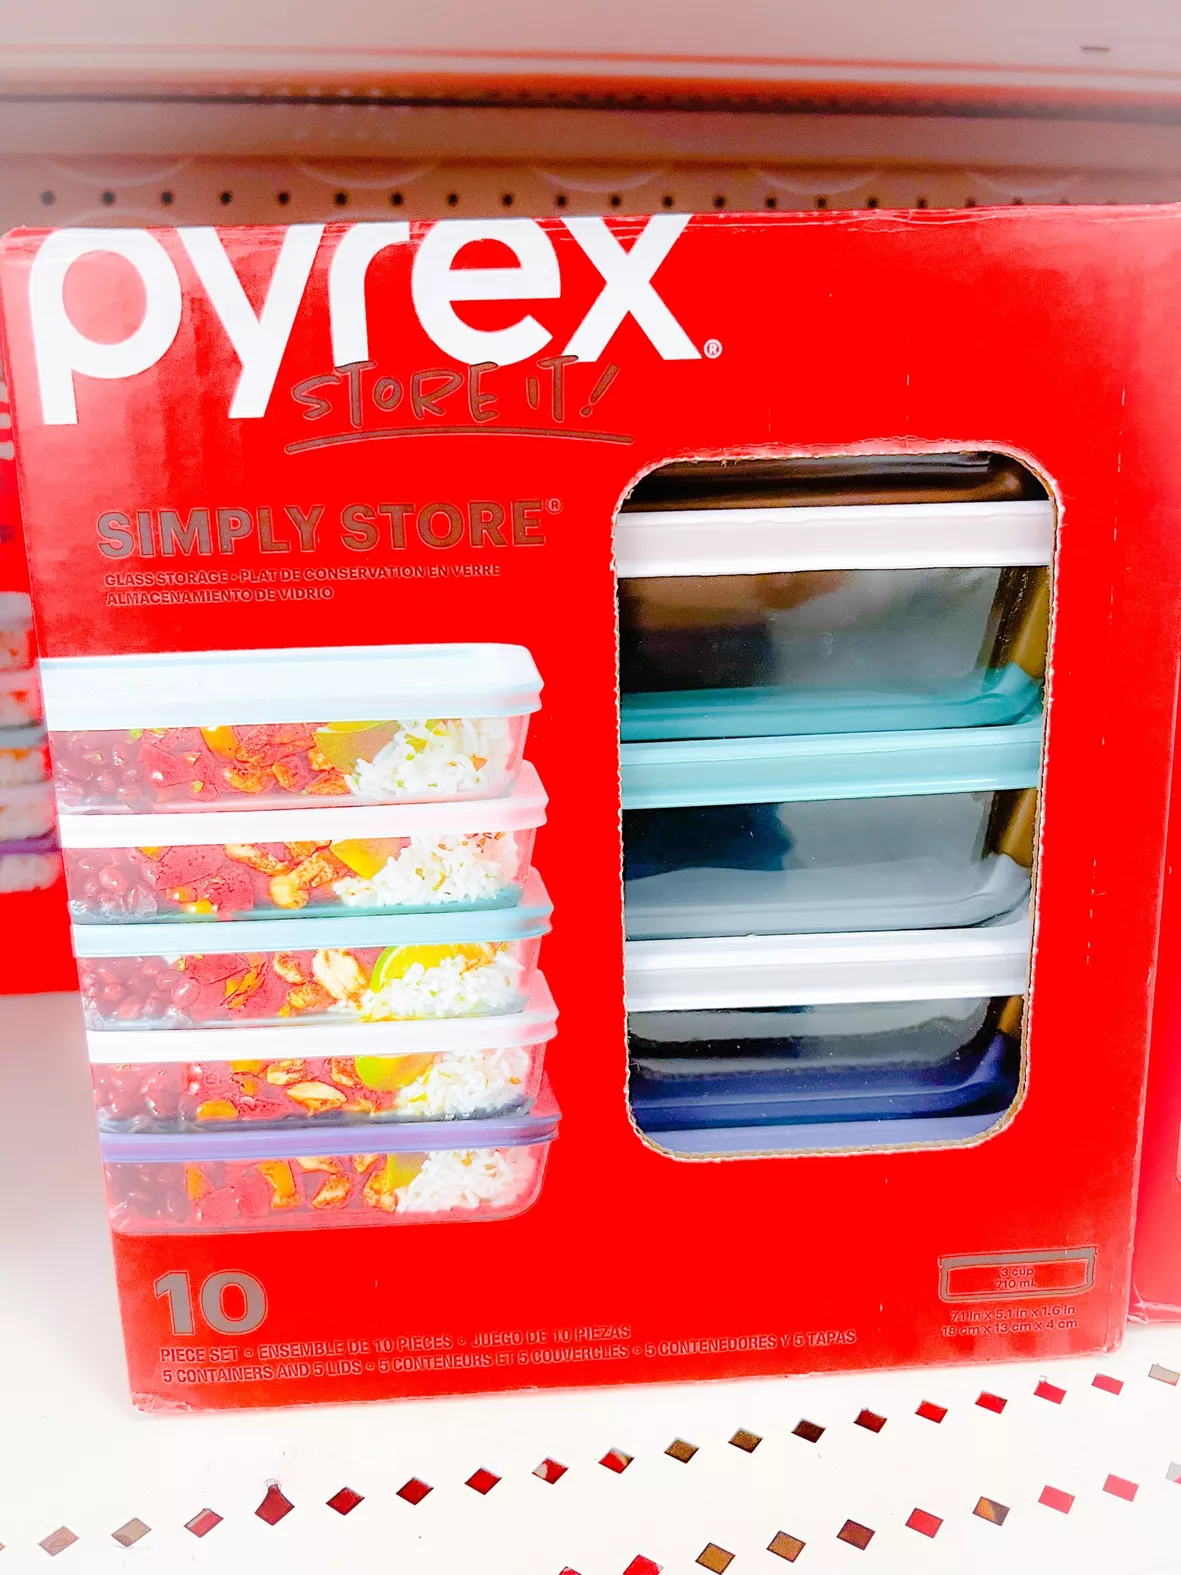 Simply Store 10-Piece Meal Prep Set with Lids, Pyrex